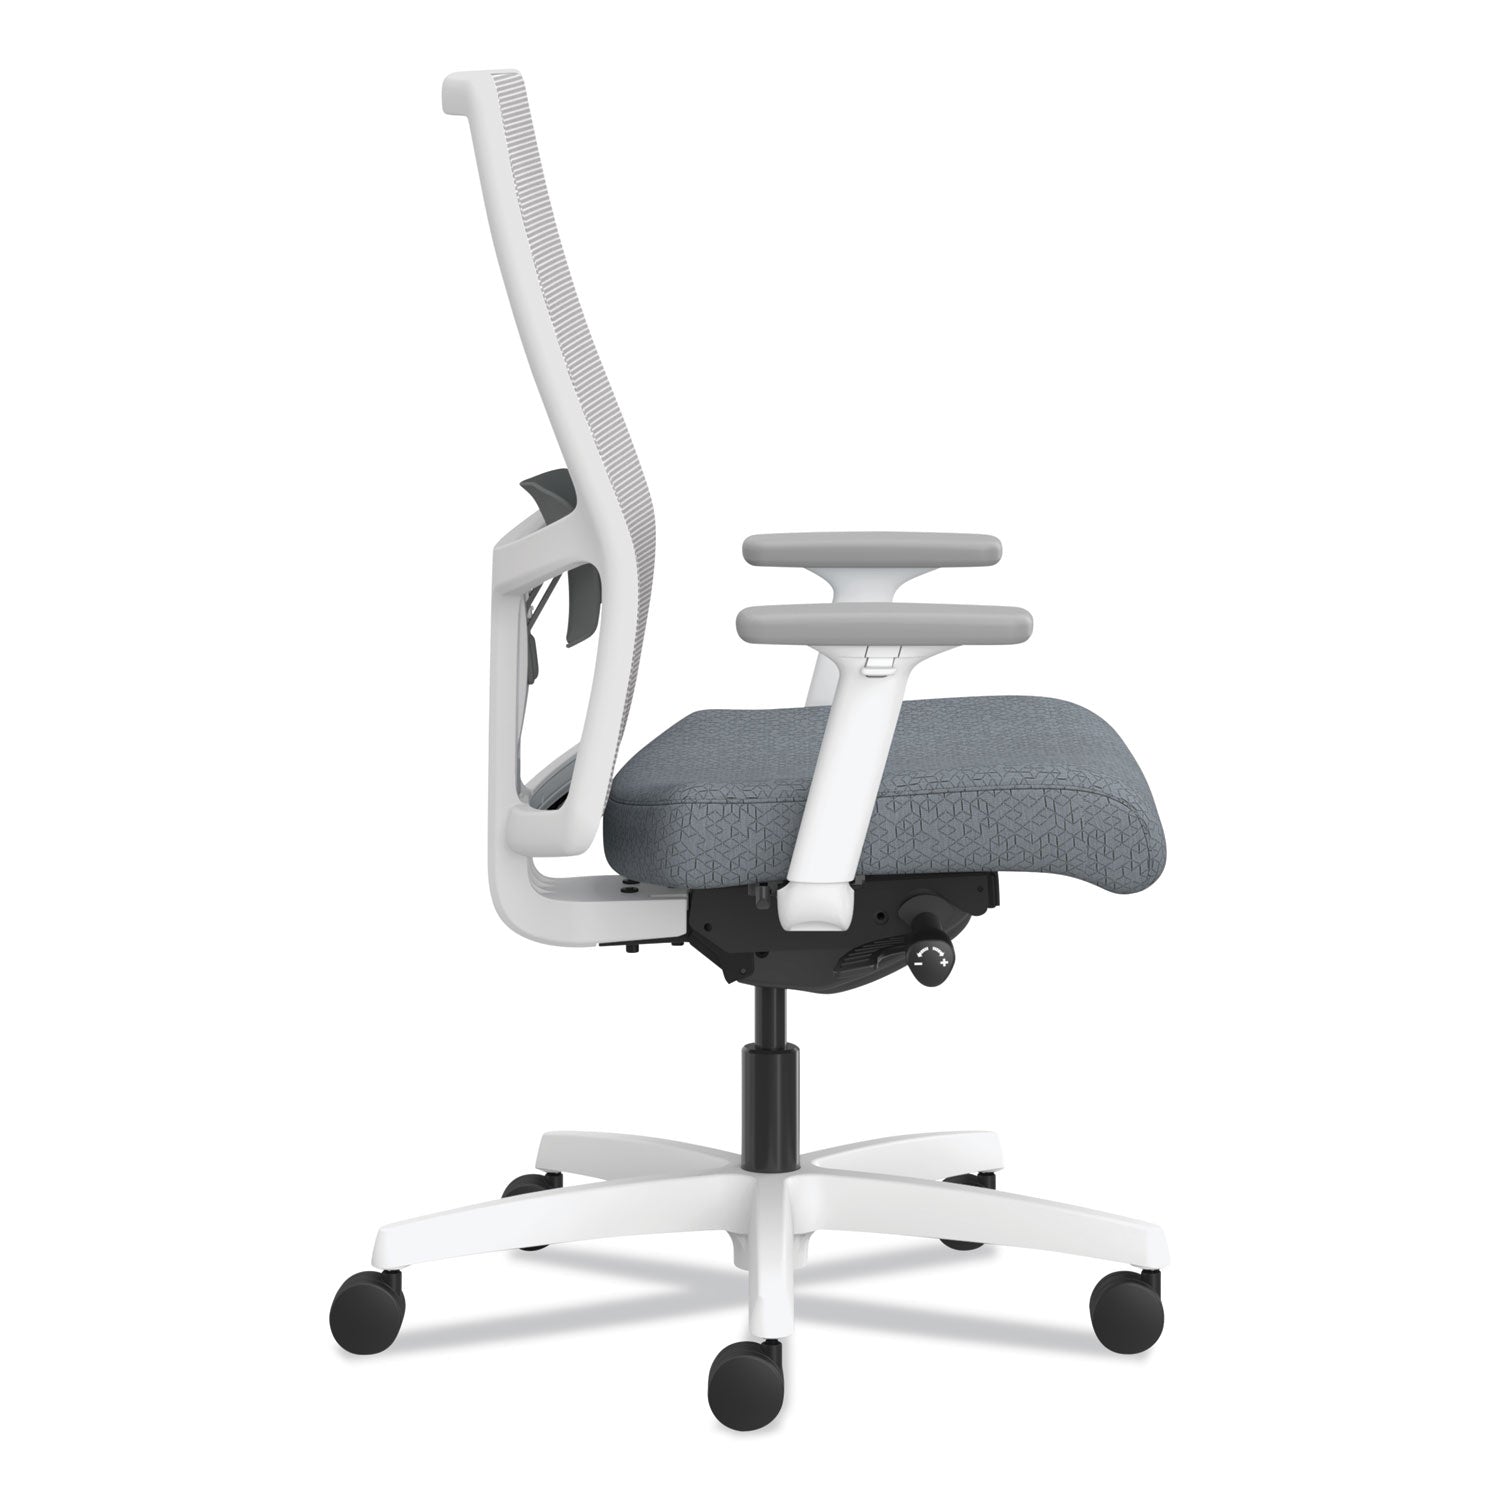 ignition-20-4-way-stretch-mid-back-mesh-task-chair-gray-adjustable-lumbar-support-basalt-fog-white-ships-in-7-10-bus-days_honi2mm2afa25tx - 4